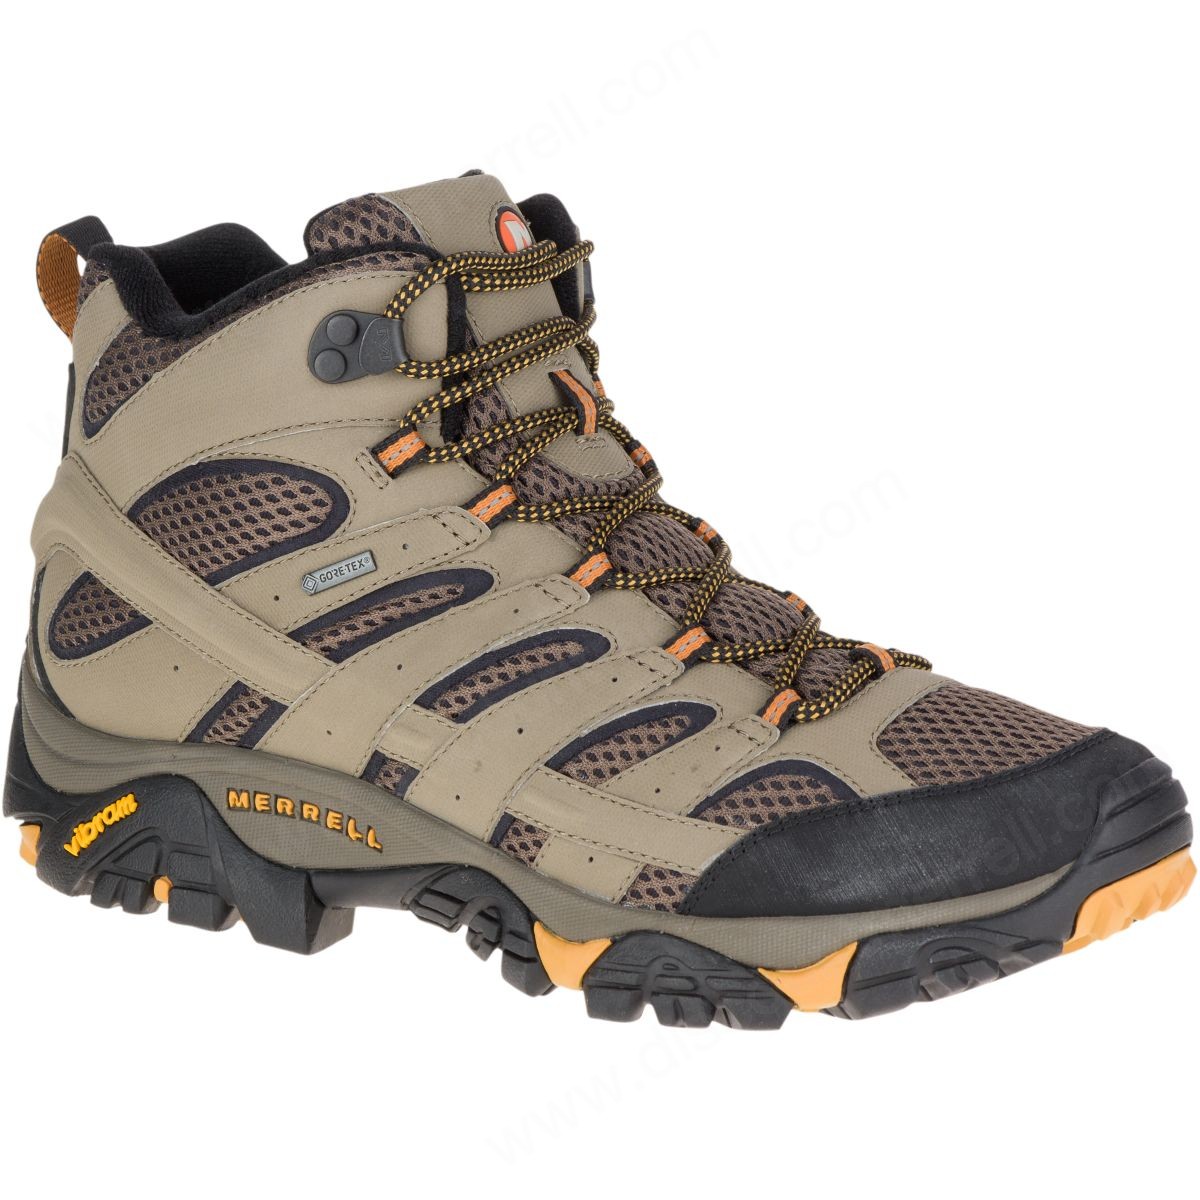 Merrell Man's Moab Mother Of All Boots™ Mid Gore-Tex® Wide Width Walnut - Merrell Man's Moab Mother Of All Boots™ Mid Gore-Tex® Wide Width Walnut